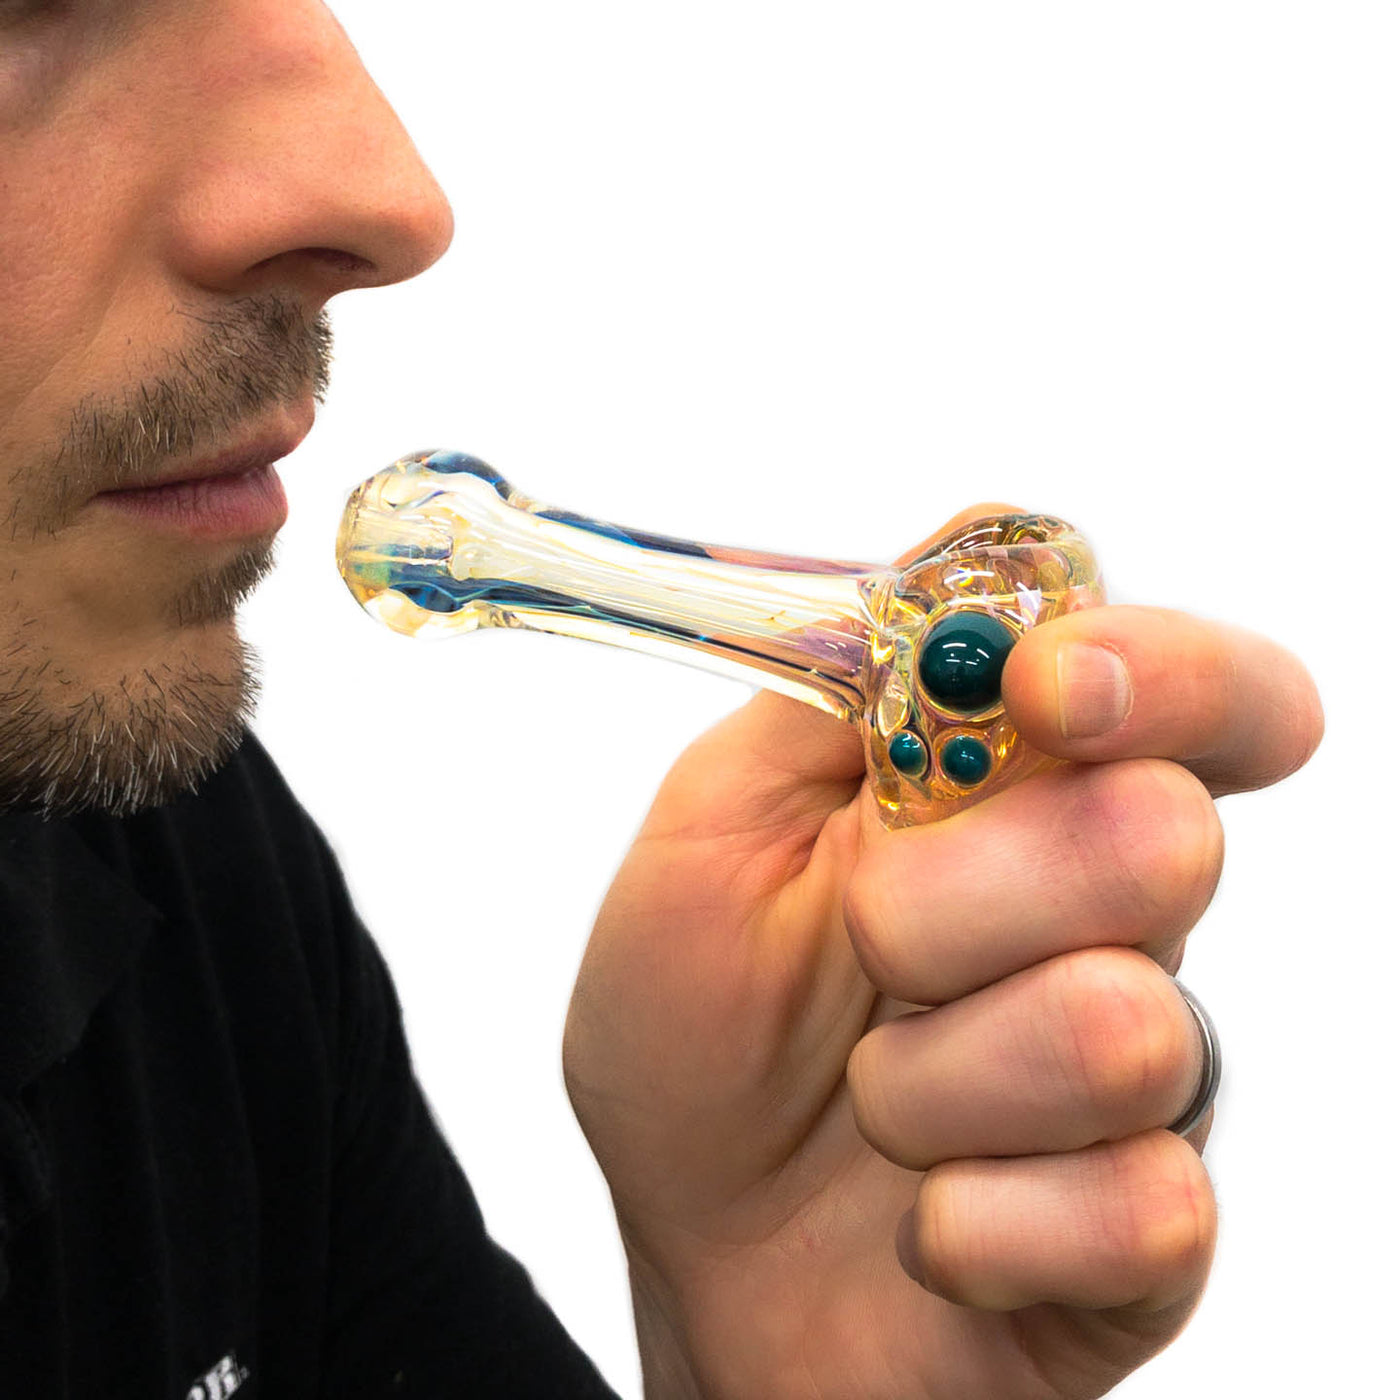 Glass Pipe - Hammer, Gold And Silver Fuming, 5.0 • American Made